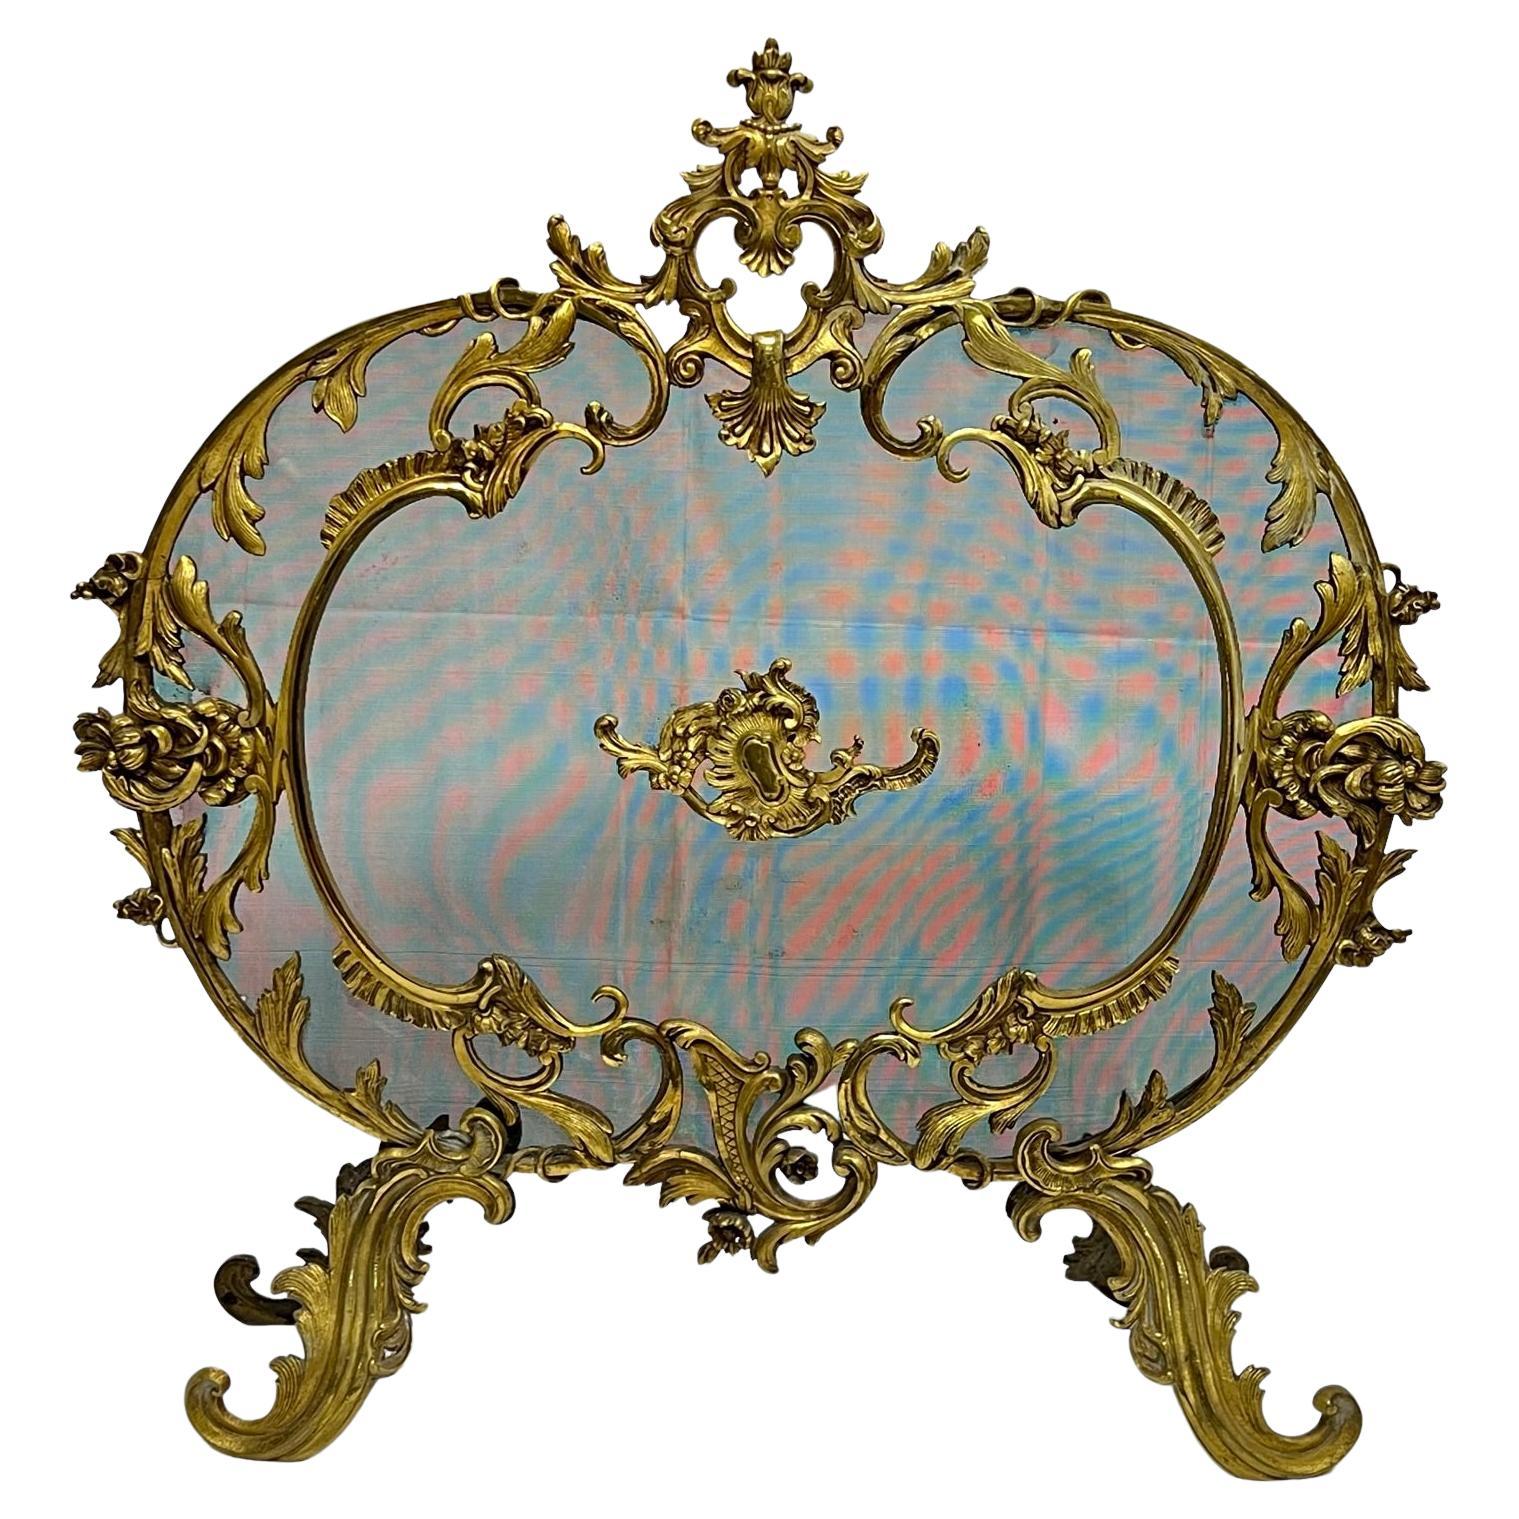 19th Century French Gilt Bronze Fireplace Screen in French Louis XV / XVI Style